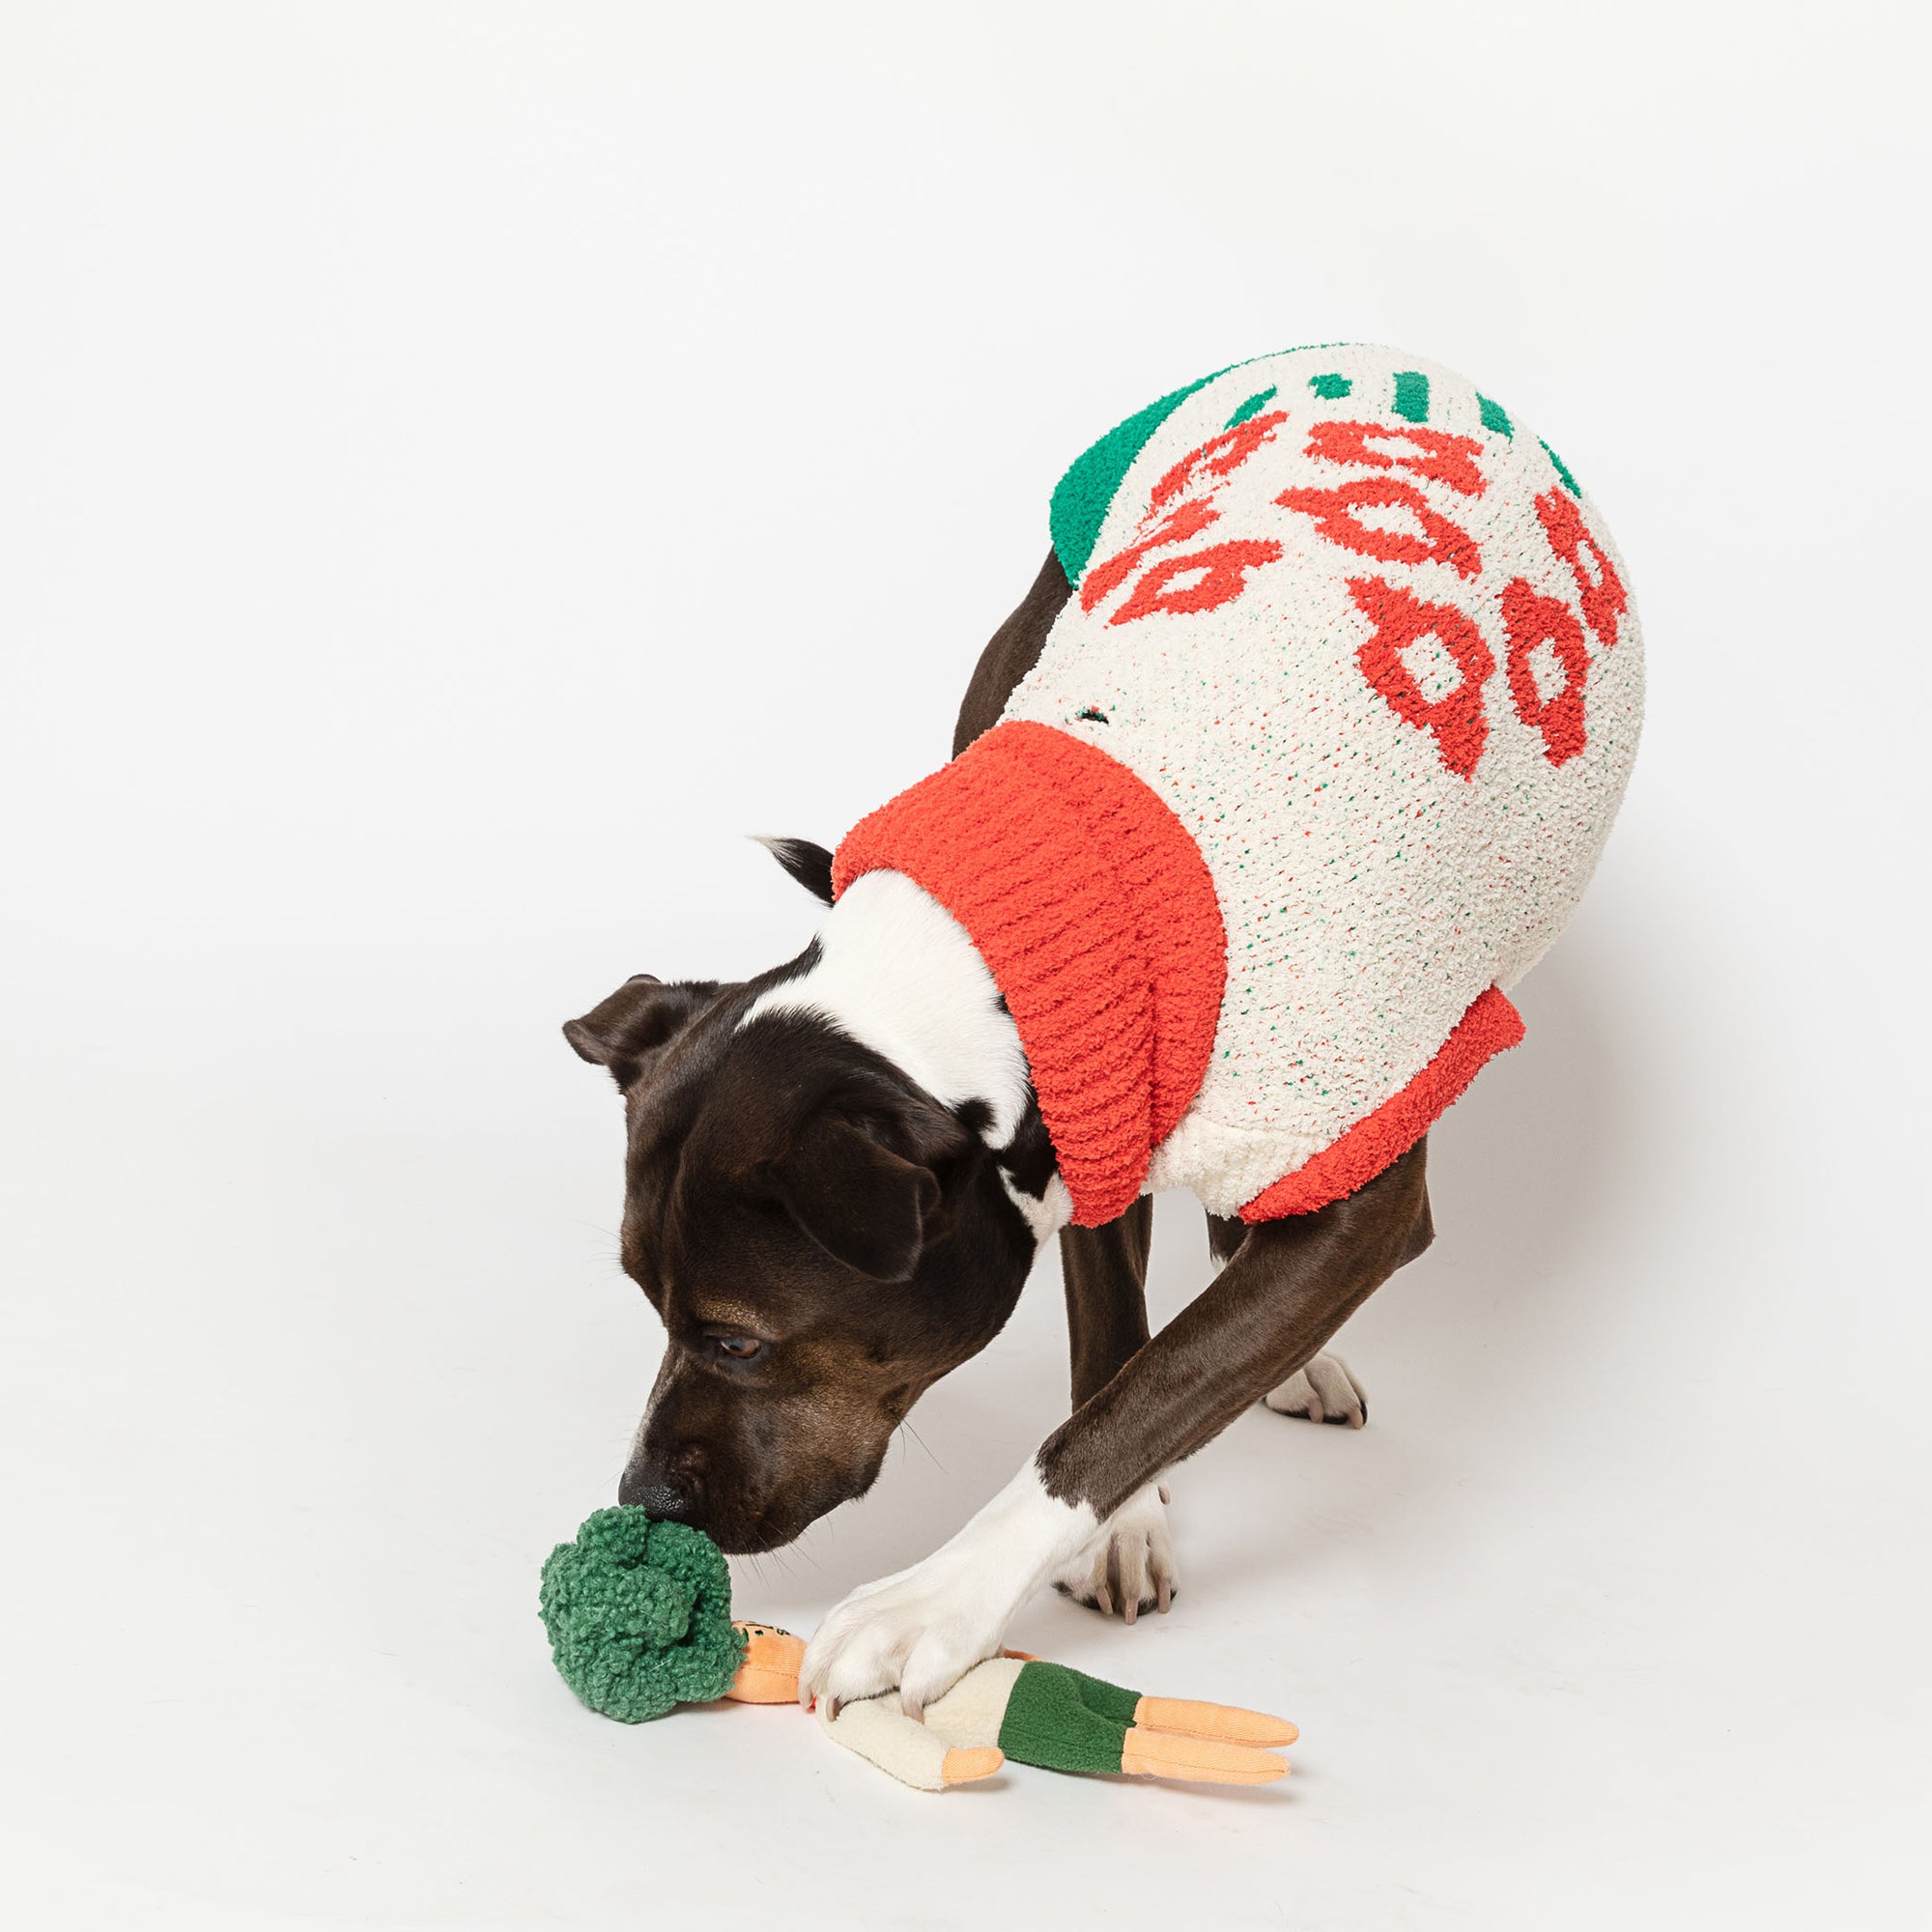 The image captures a brown dog with white patches, clad in a festive red and white sweater, interacting with a green-haired doll-shaped nosework toy. The dog is attentively sniffing or biting the toy, demonstrating how it engages with the toy's features, potentially searching for treats inside. The neutral white background ensures the focus remains on the dog and its interaction with the toy, highlighting the purpose of nosework toys in providing mental stimulation and entertainment for pets.